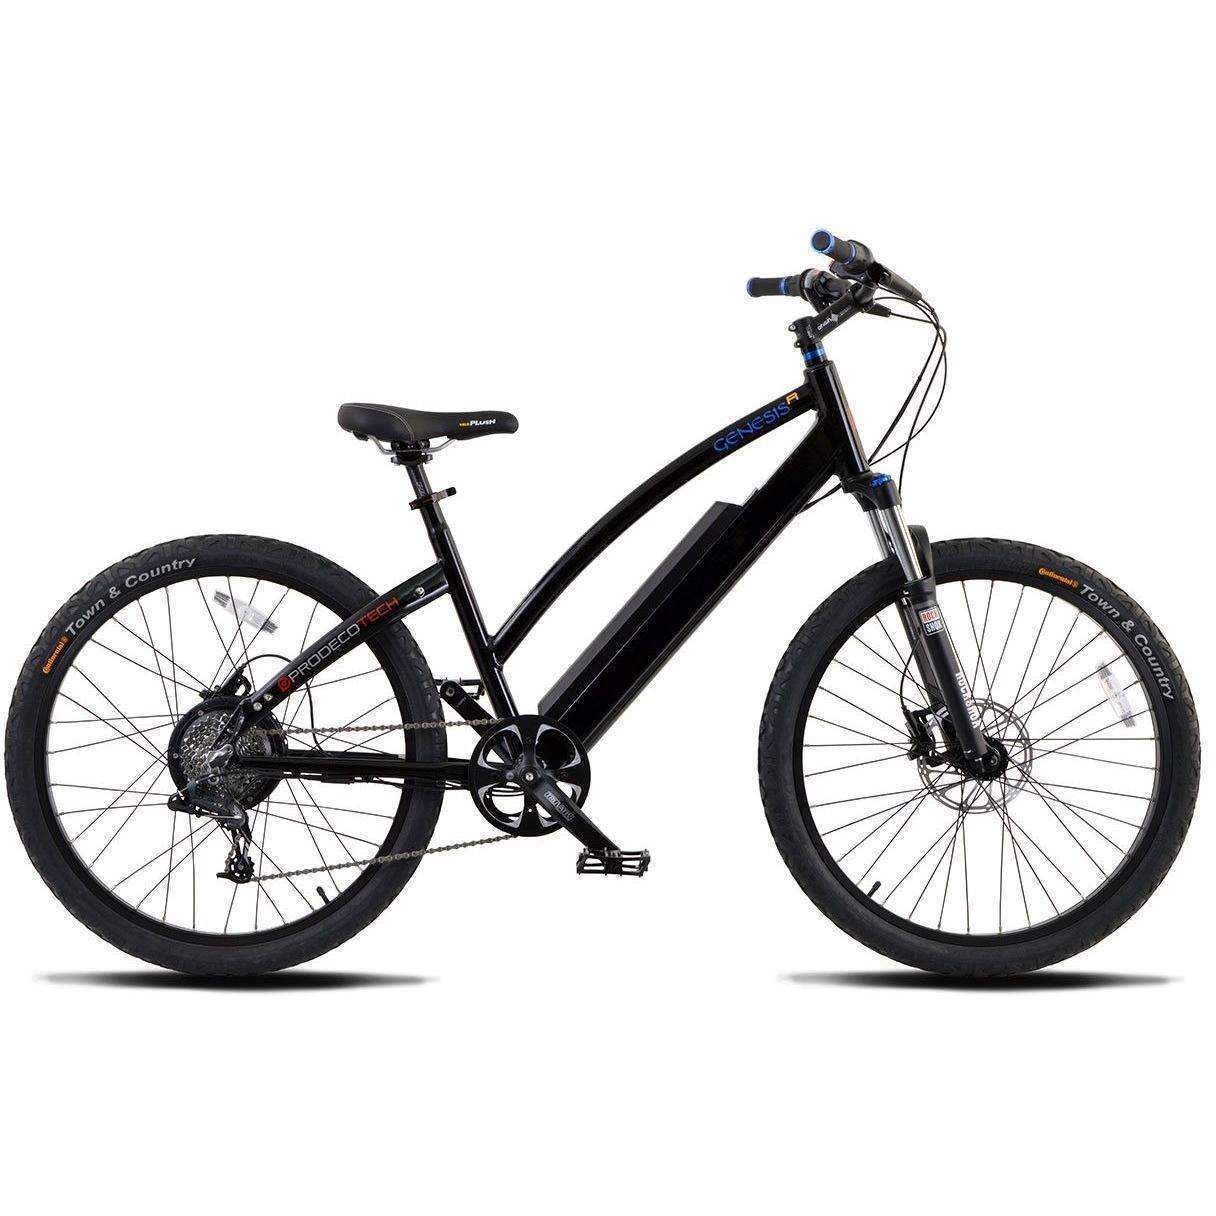 Prodecotech Genisis V5 electric bicycle